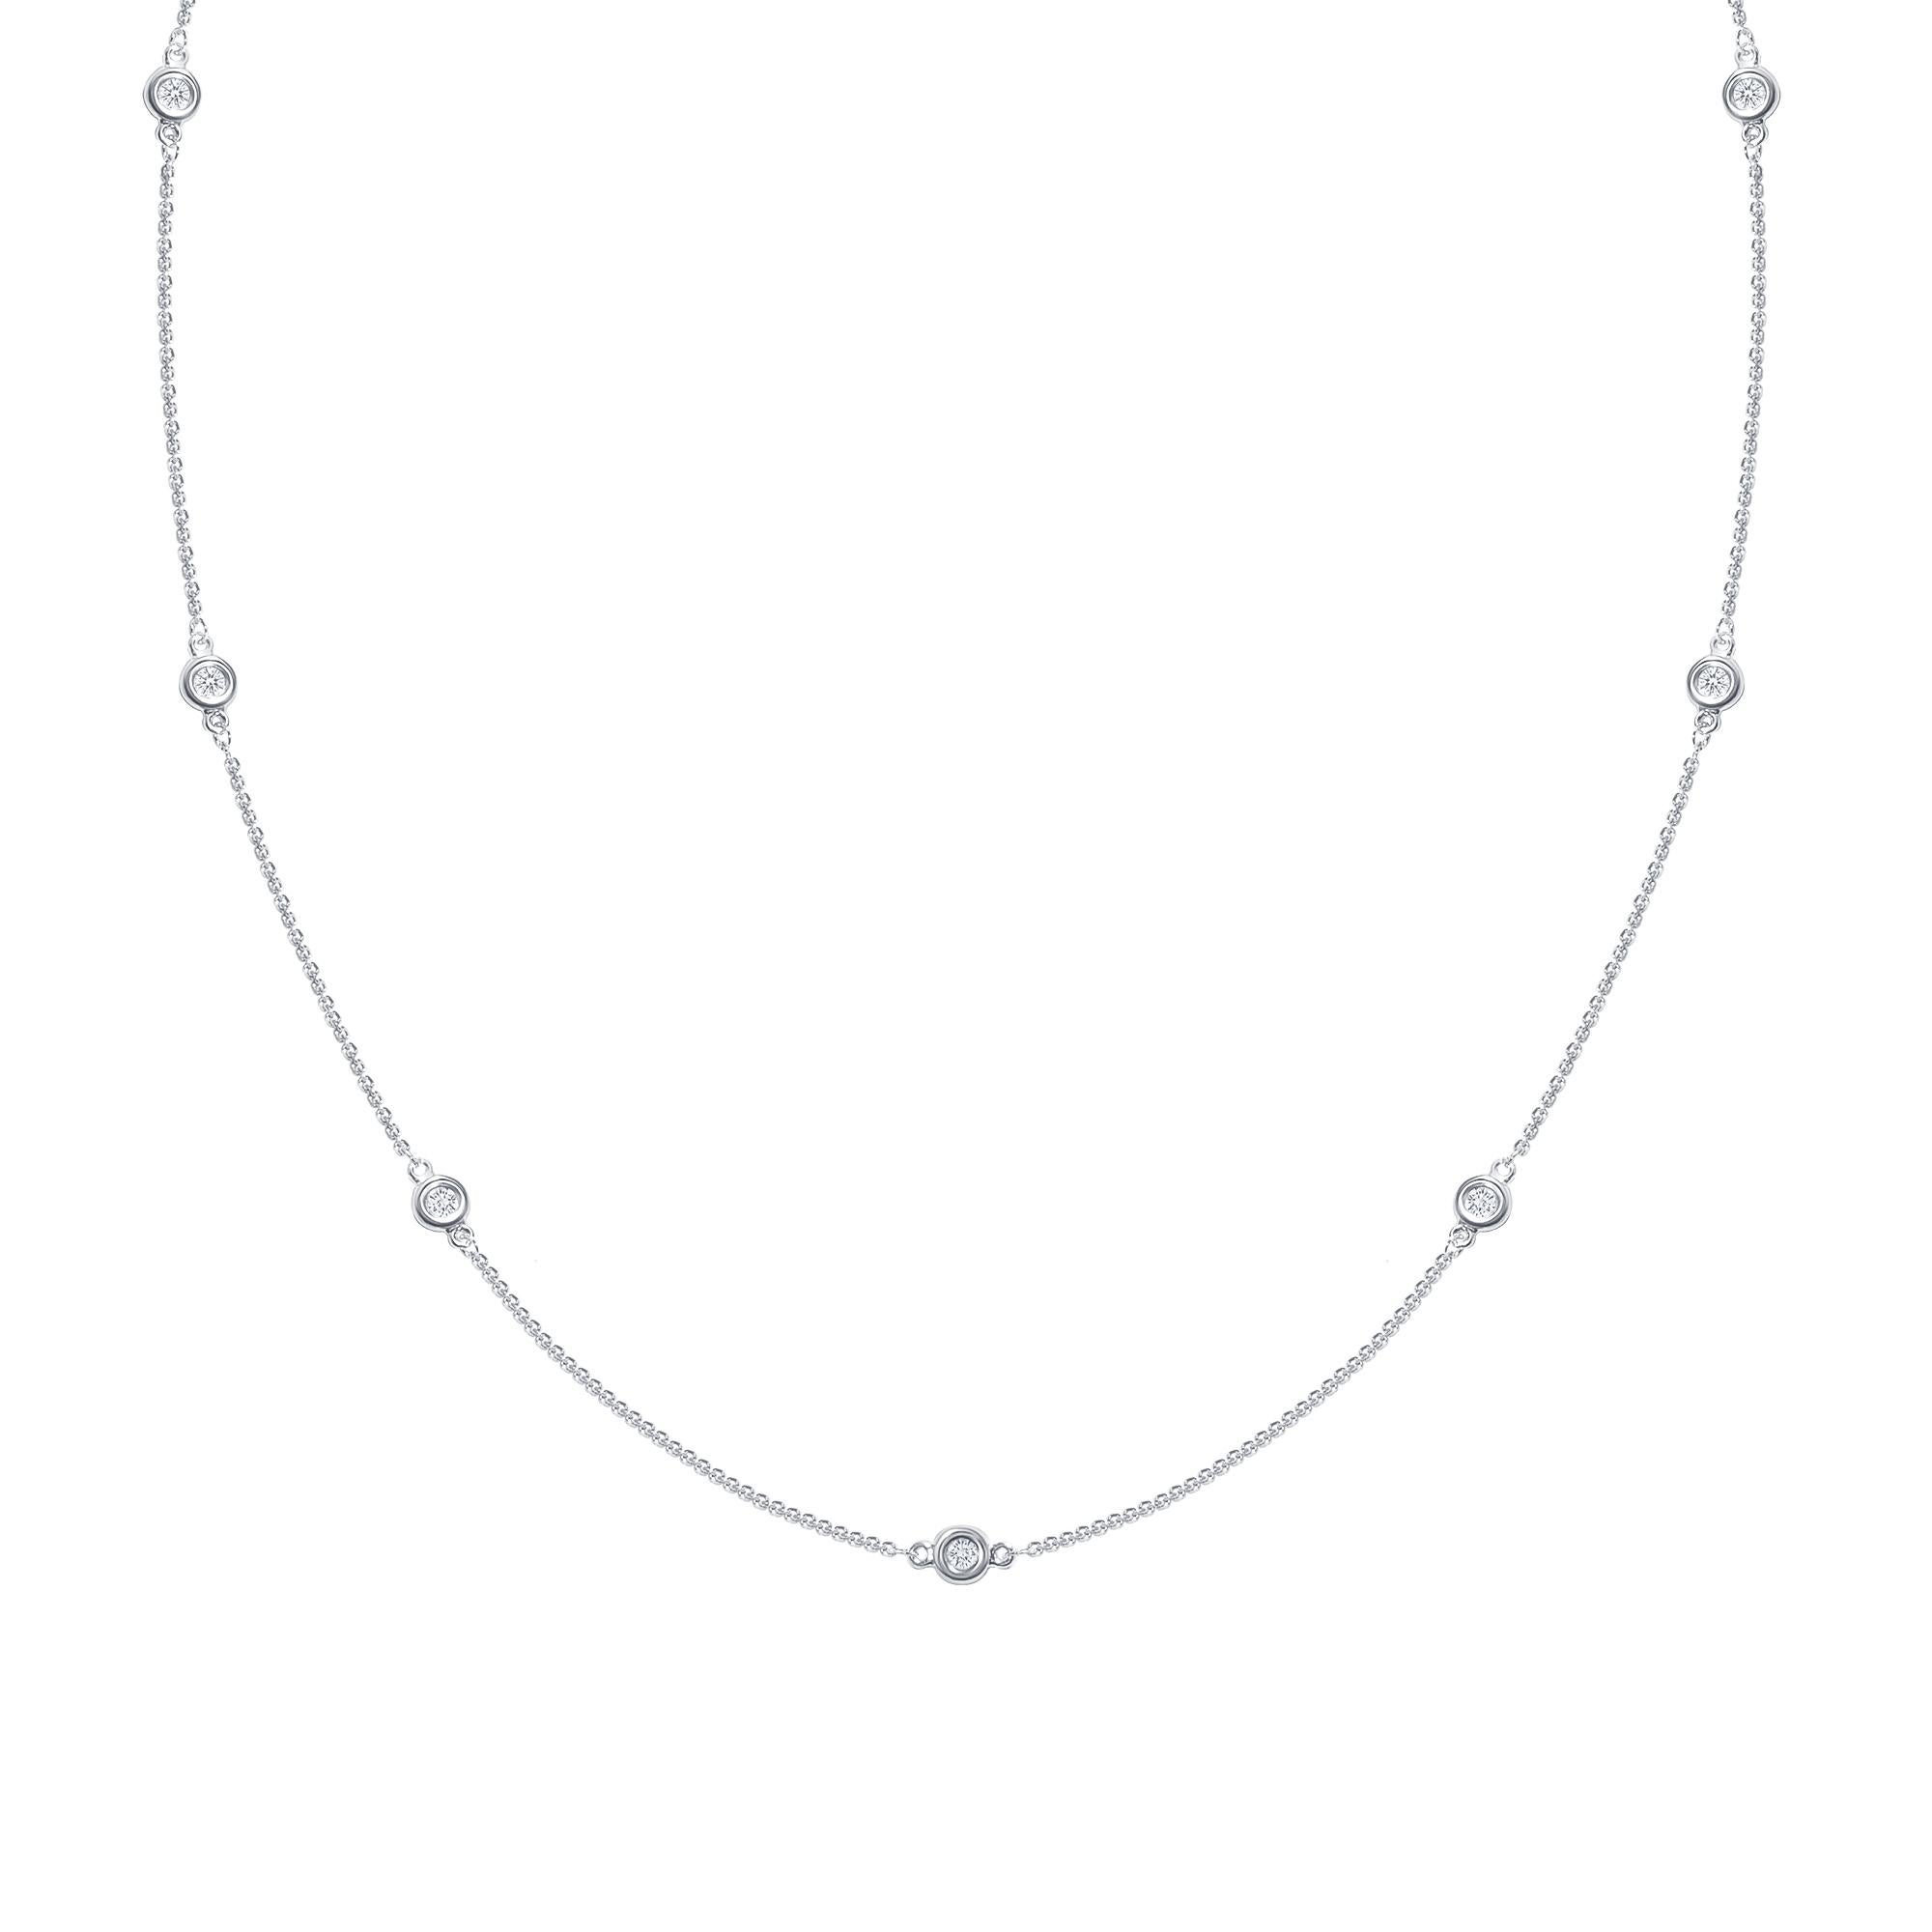 Eight elegant round diamonds set in a bezel setting along a 14k gold chain necklace.

Gold: 14K Gold
Number of Diamonds: Eight
Gold Color: White Gold
Carat: 0.50 Carats
Necklace Length: 24 Inches
Diamond Clarity: VS
Diamond Color: F
Chain Type: